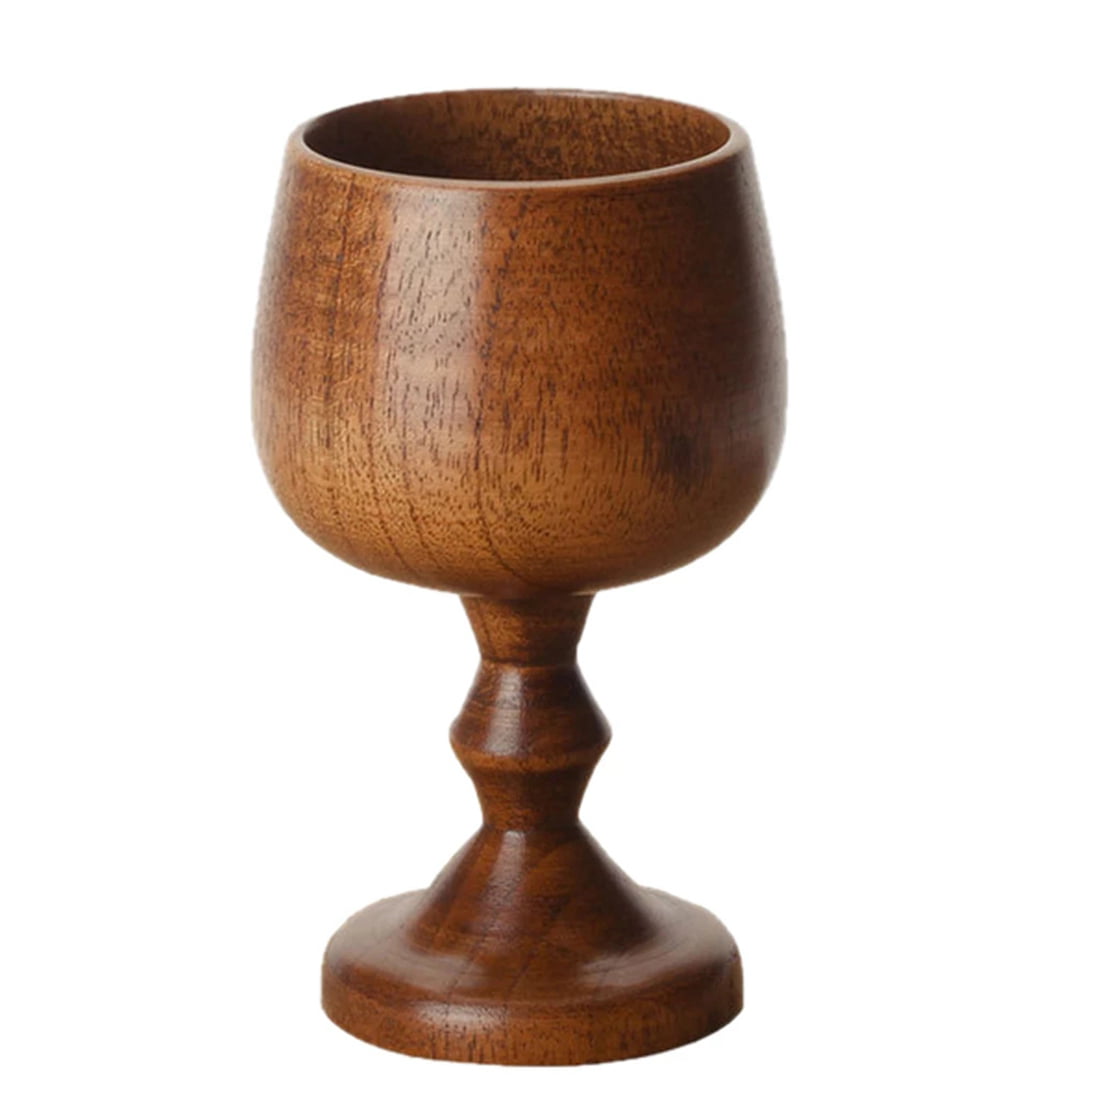 Ebros Gift Mystical Howling Gray Wolf Wine Goblet 7oz Chalice Cup In Rustic Wood Bark Roots Design 